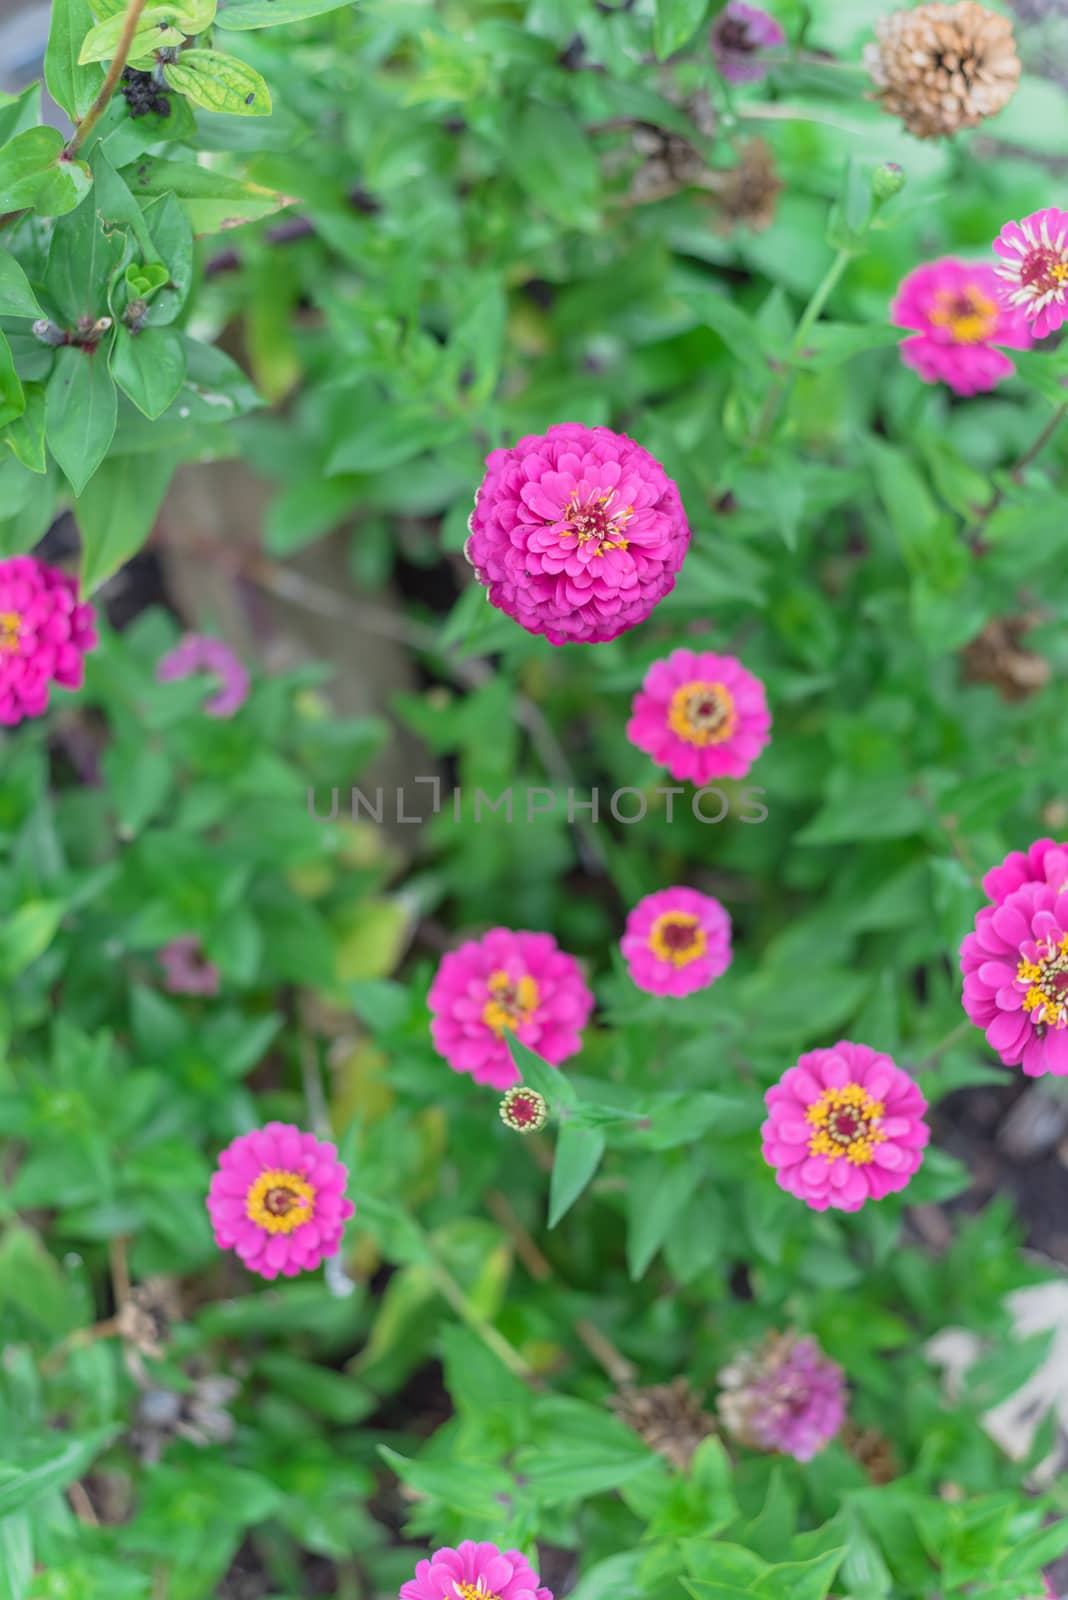 Blooming violet zinnia bush at flower bed in community allotment near Dallas, Texas, USA by trongnguyen